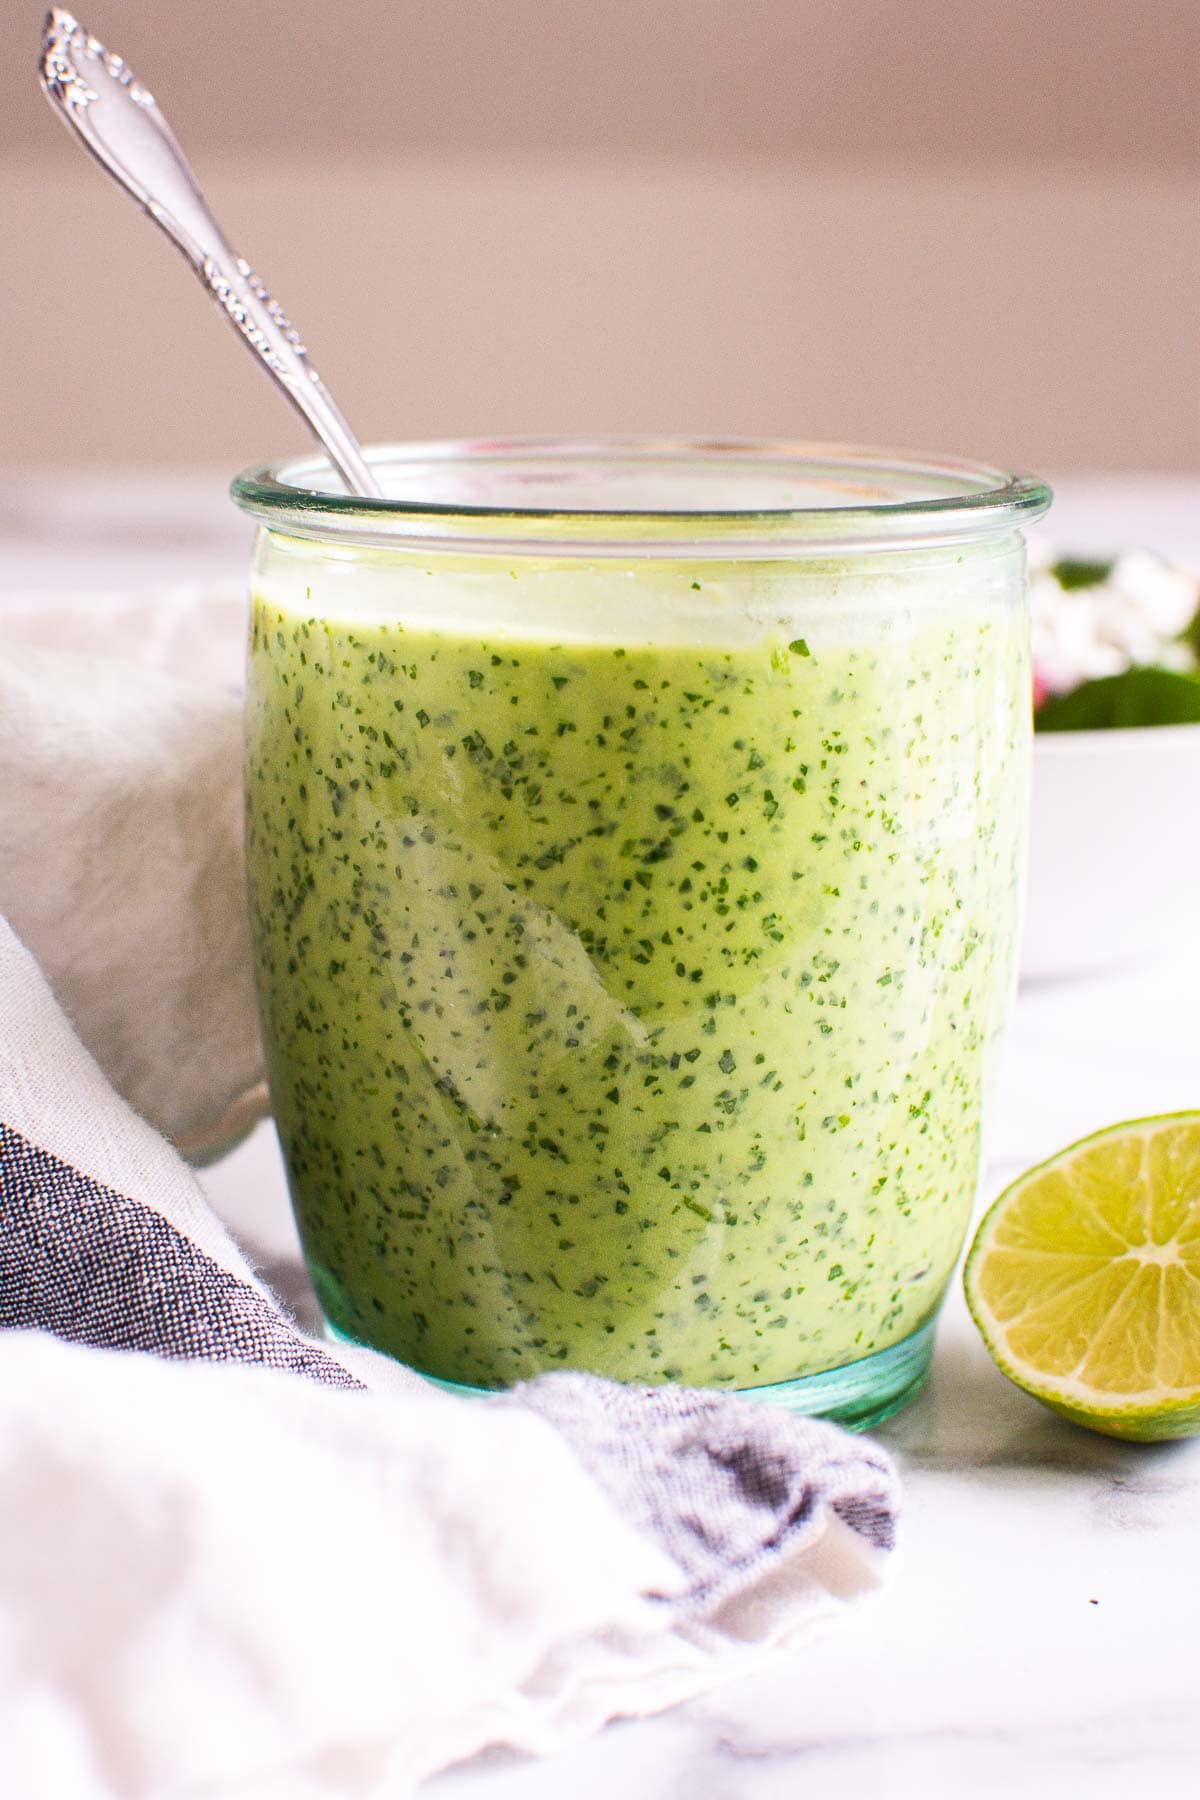 Avocado lime dressing in a glass jar with a spoon and cut up lime near it.